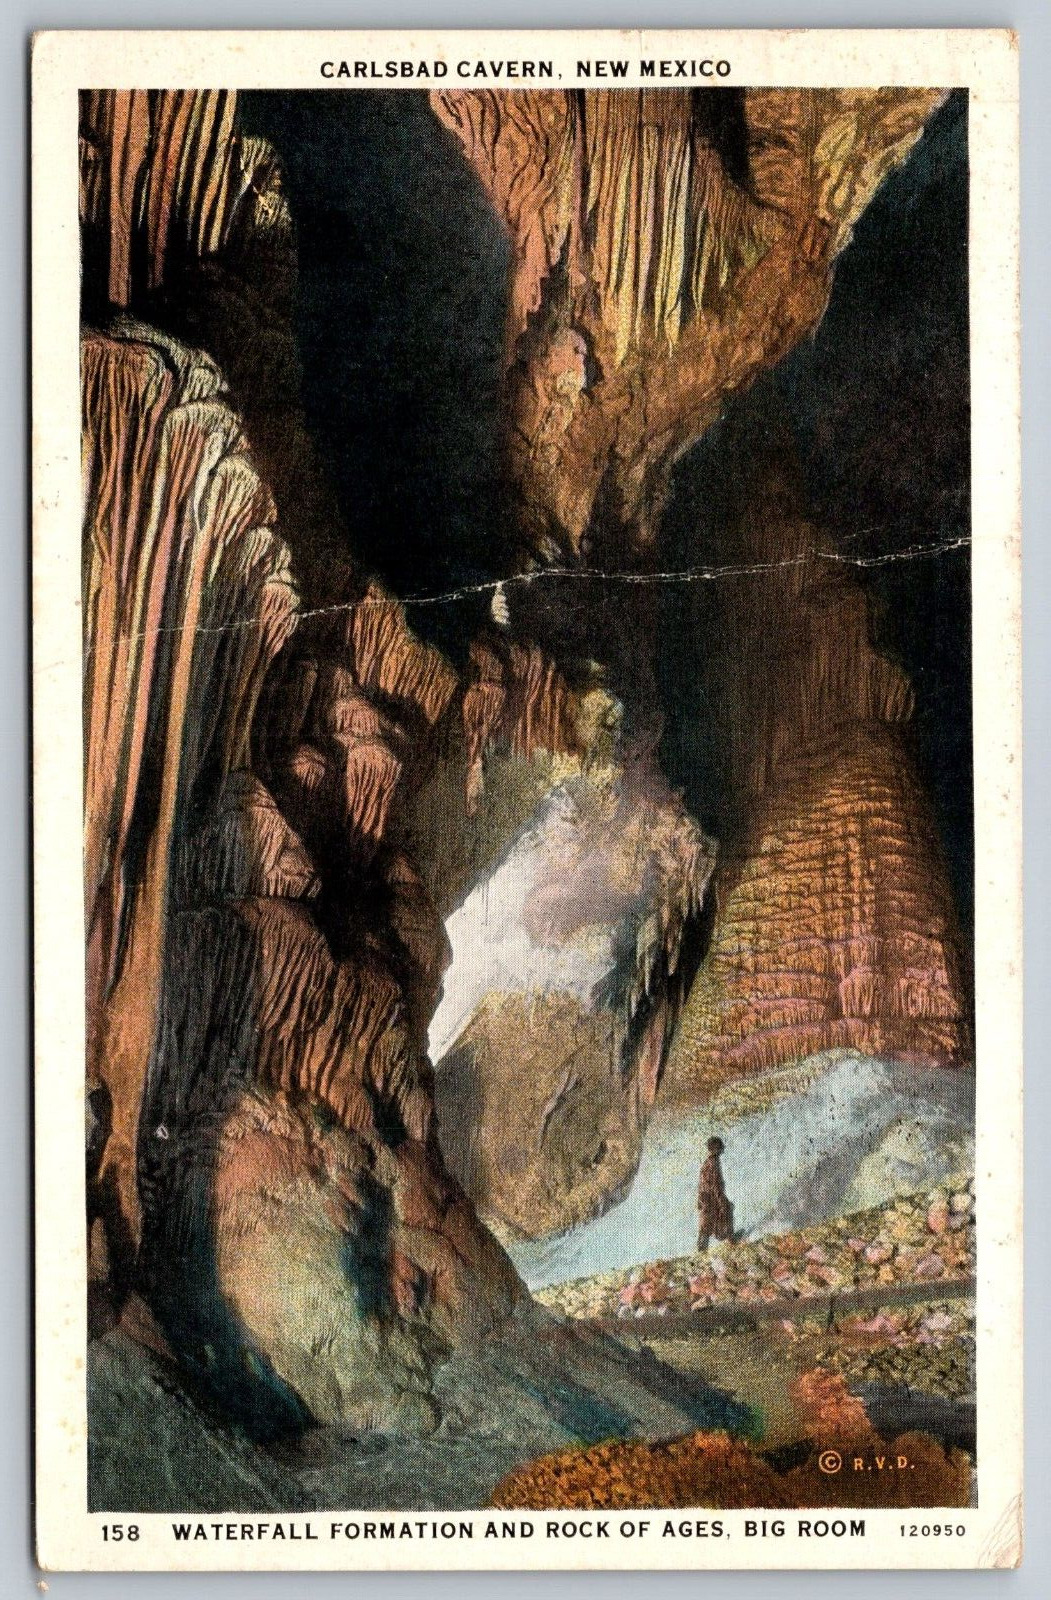 Antique Post Card Carlsbad Cavern New Mexico Waterfall Rock of Ages Big Room 